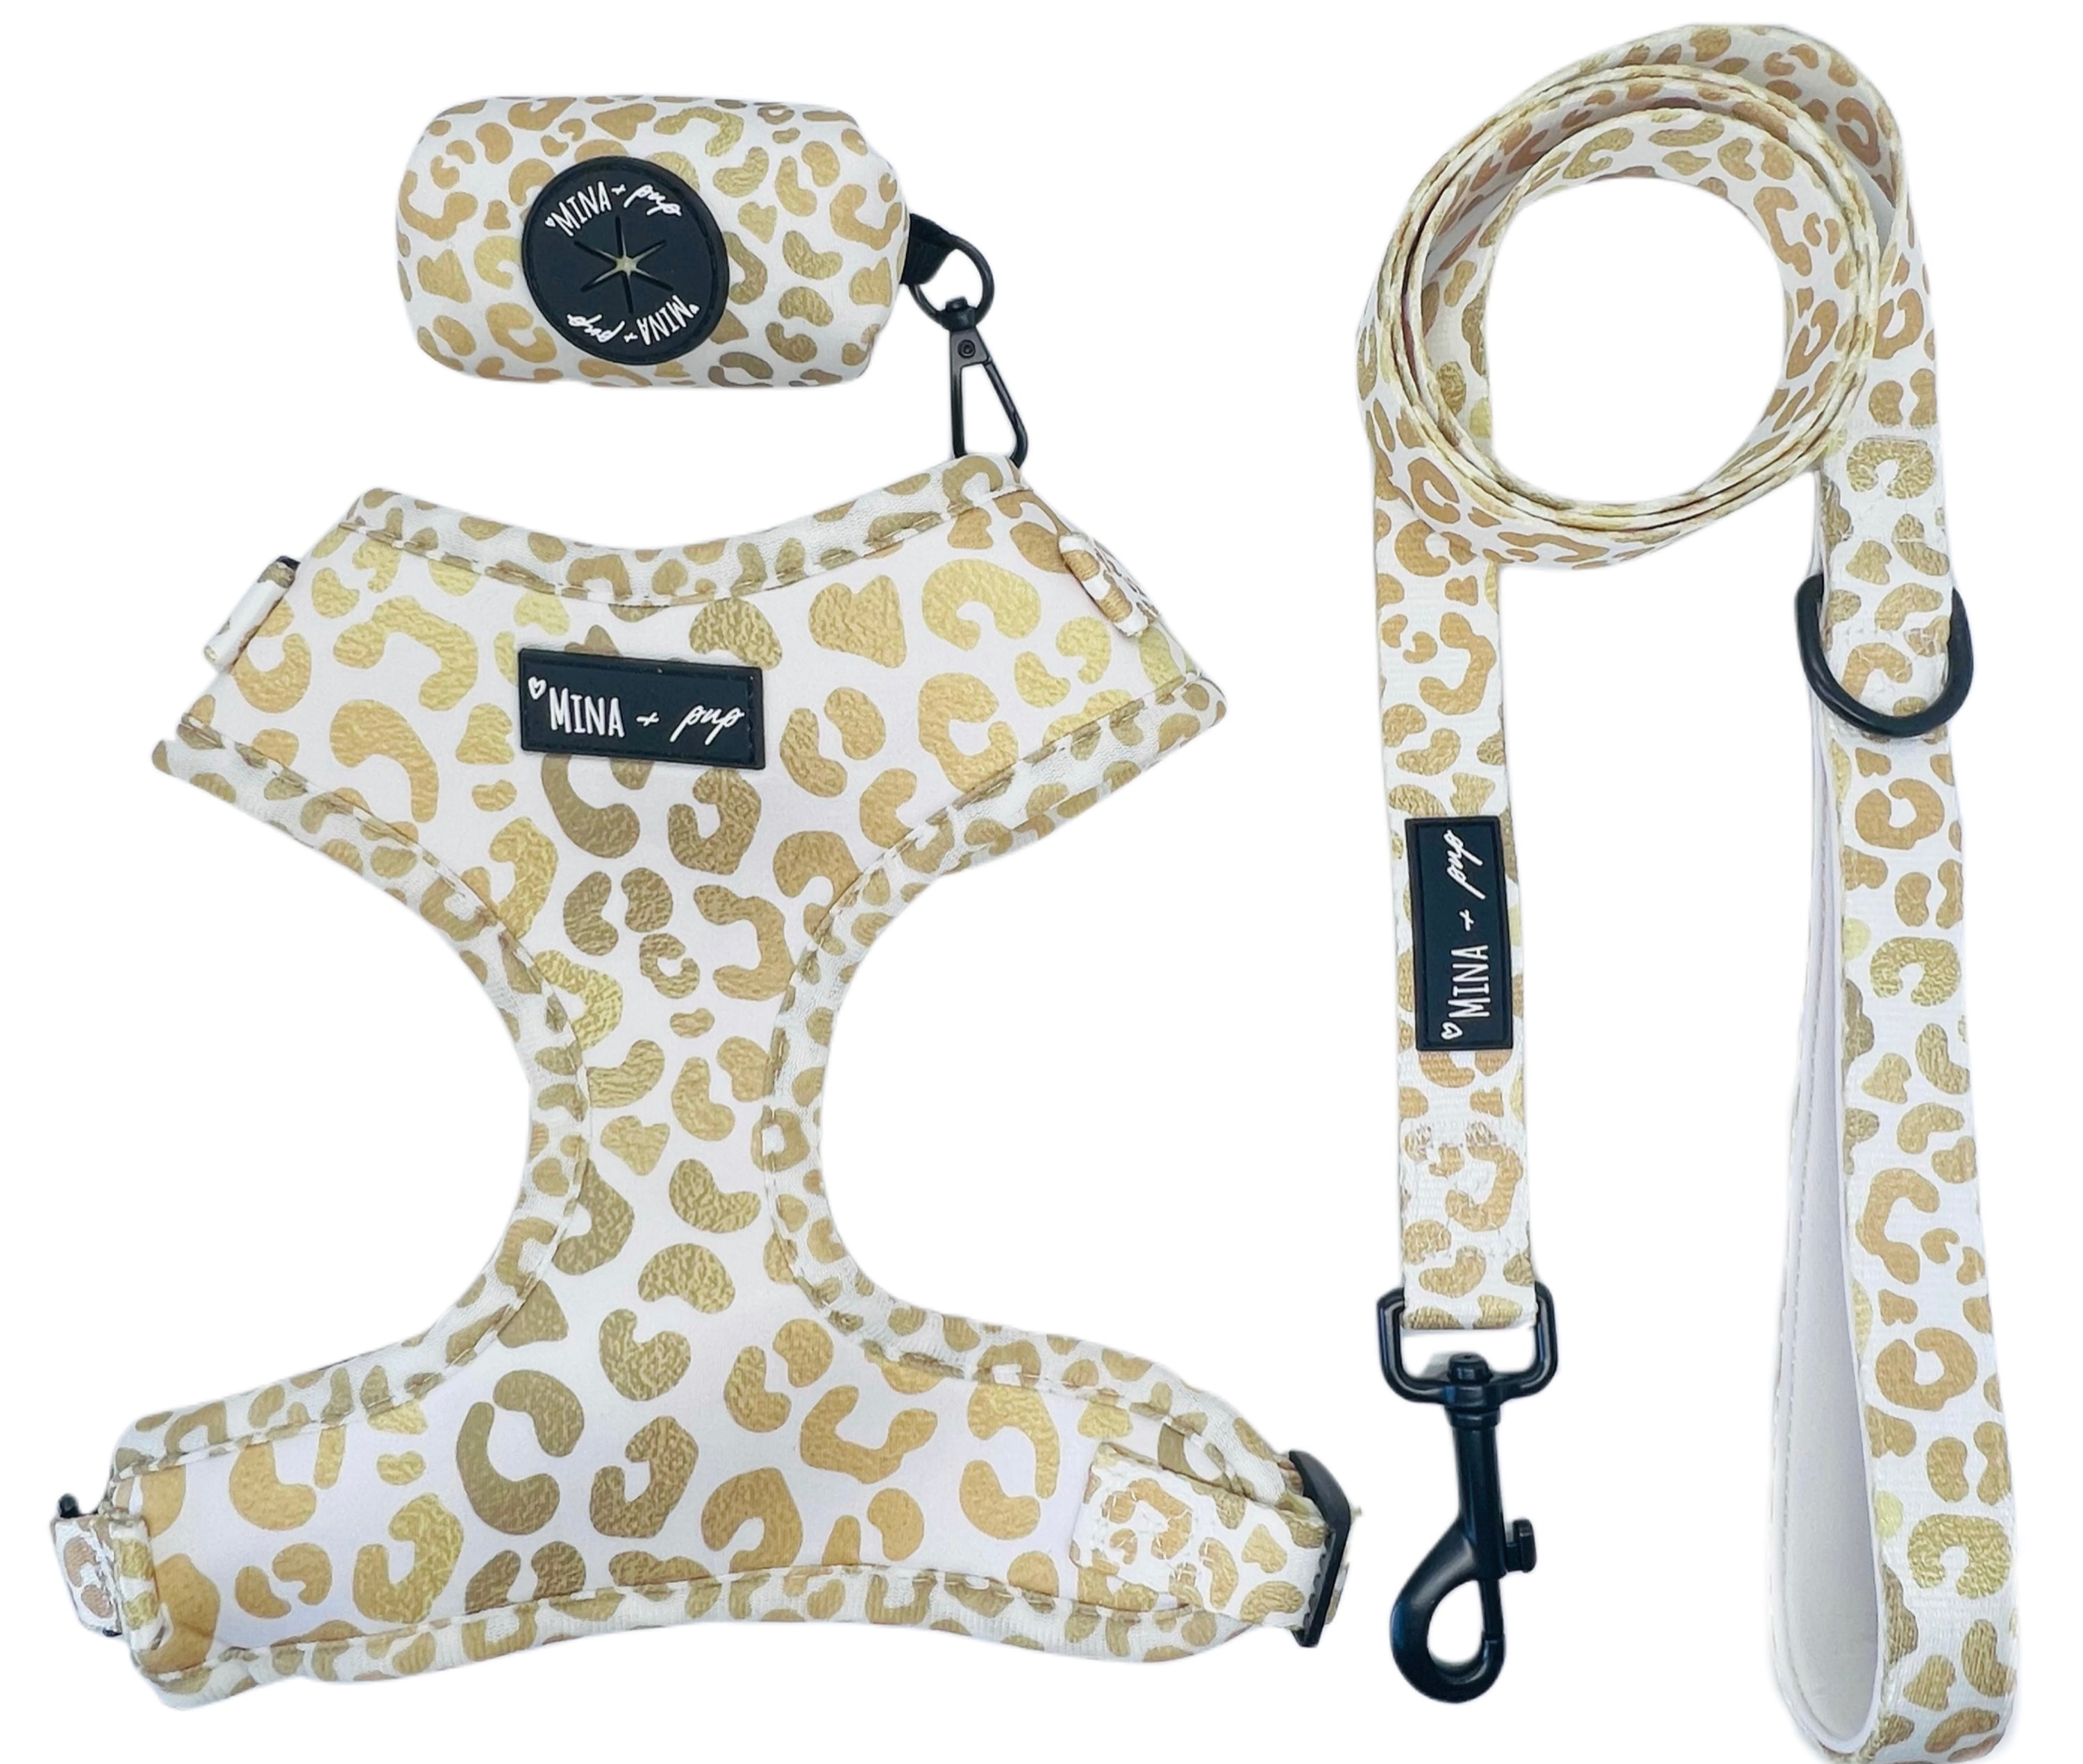 "You're So Golden" Adjustable Harness - 70DC3D3E-B295-4CCD-AFB9-08F09BE2D89E